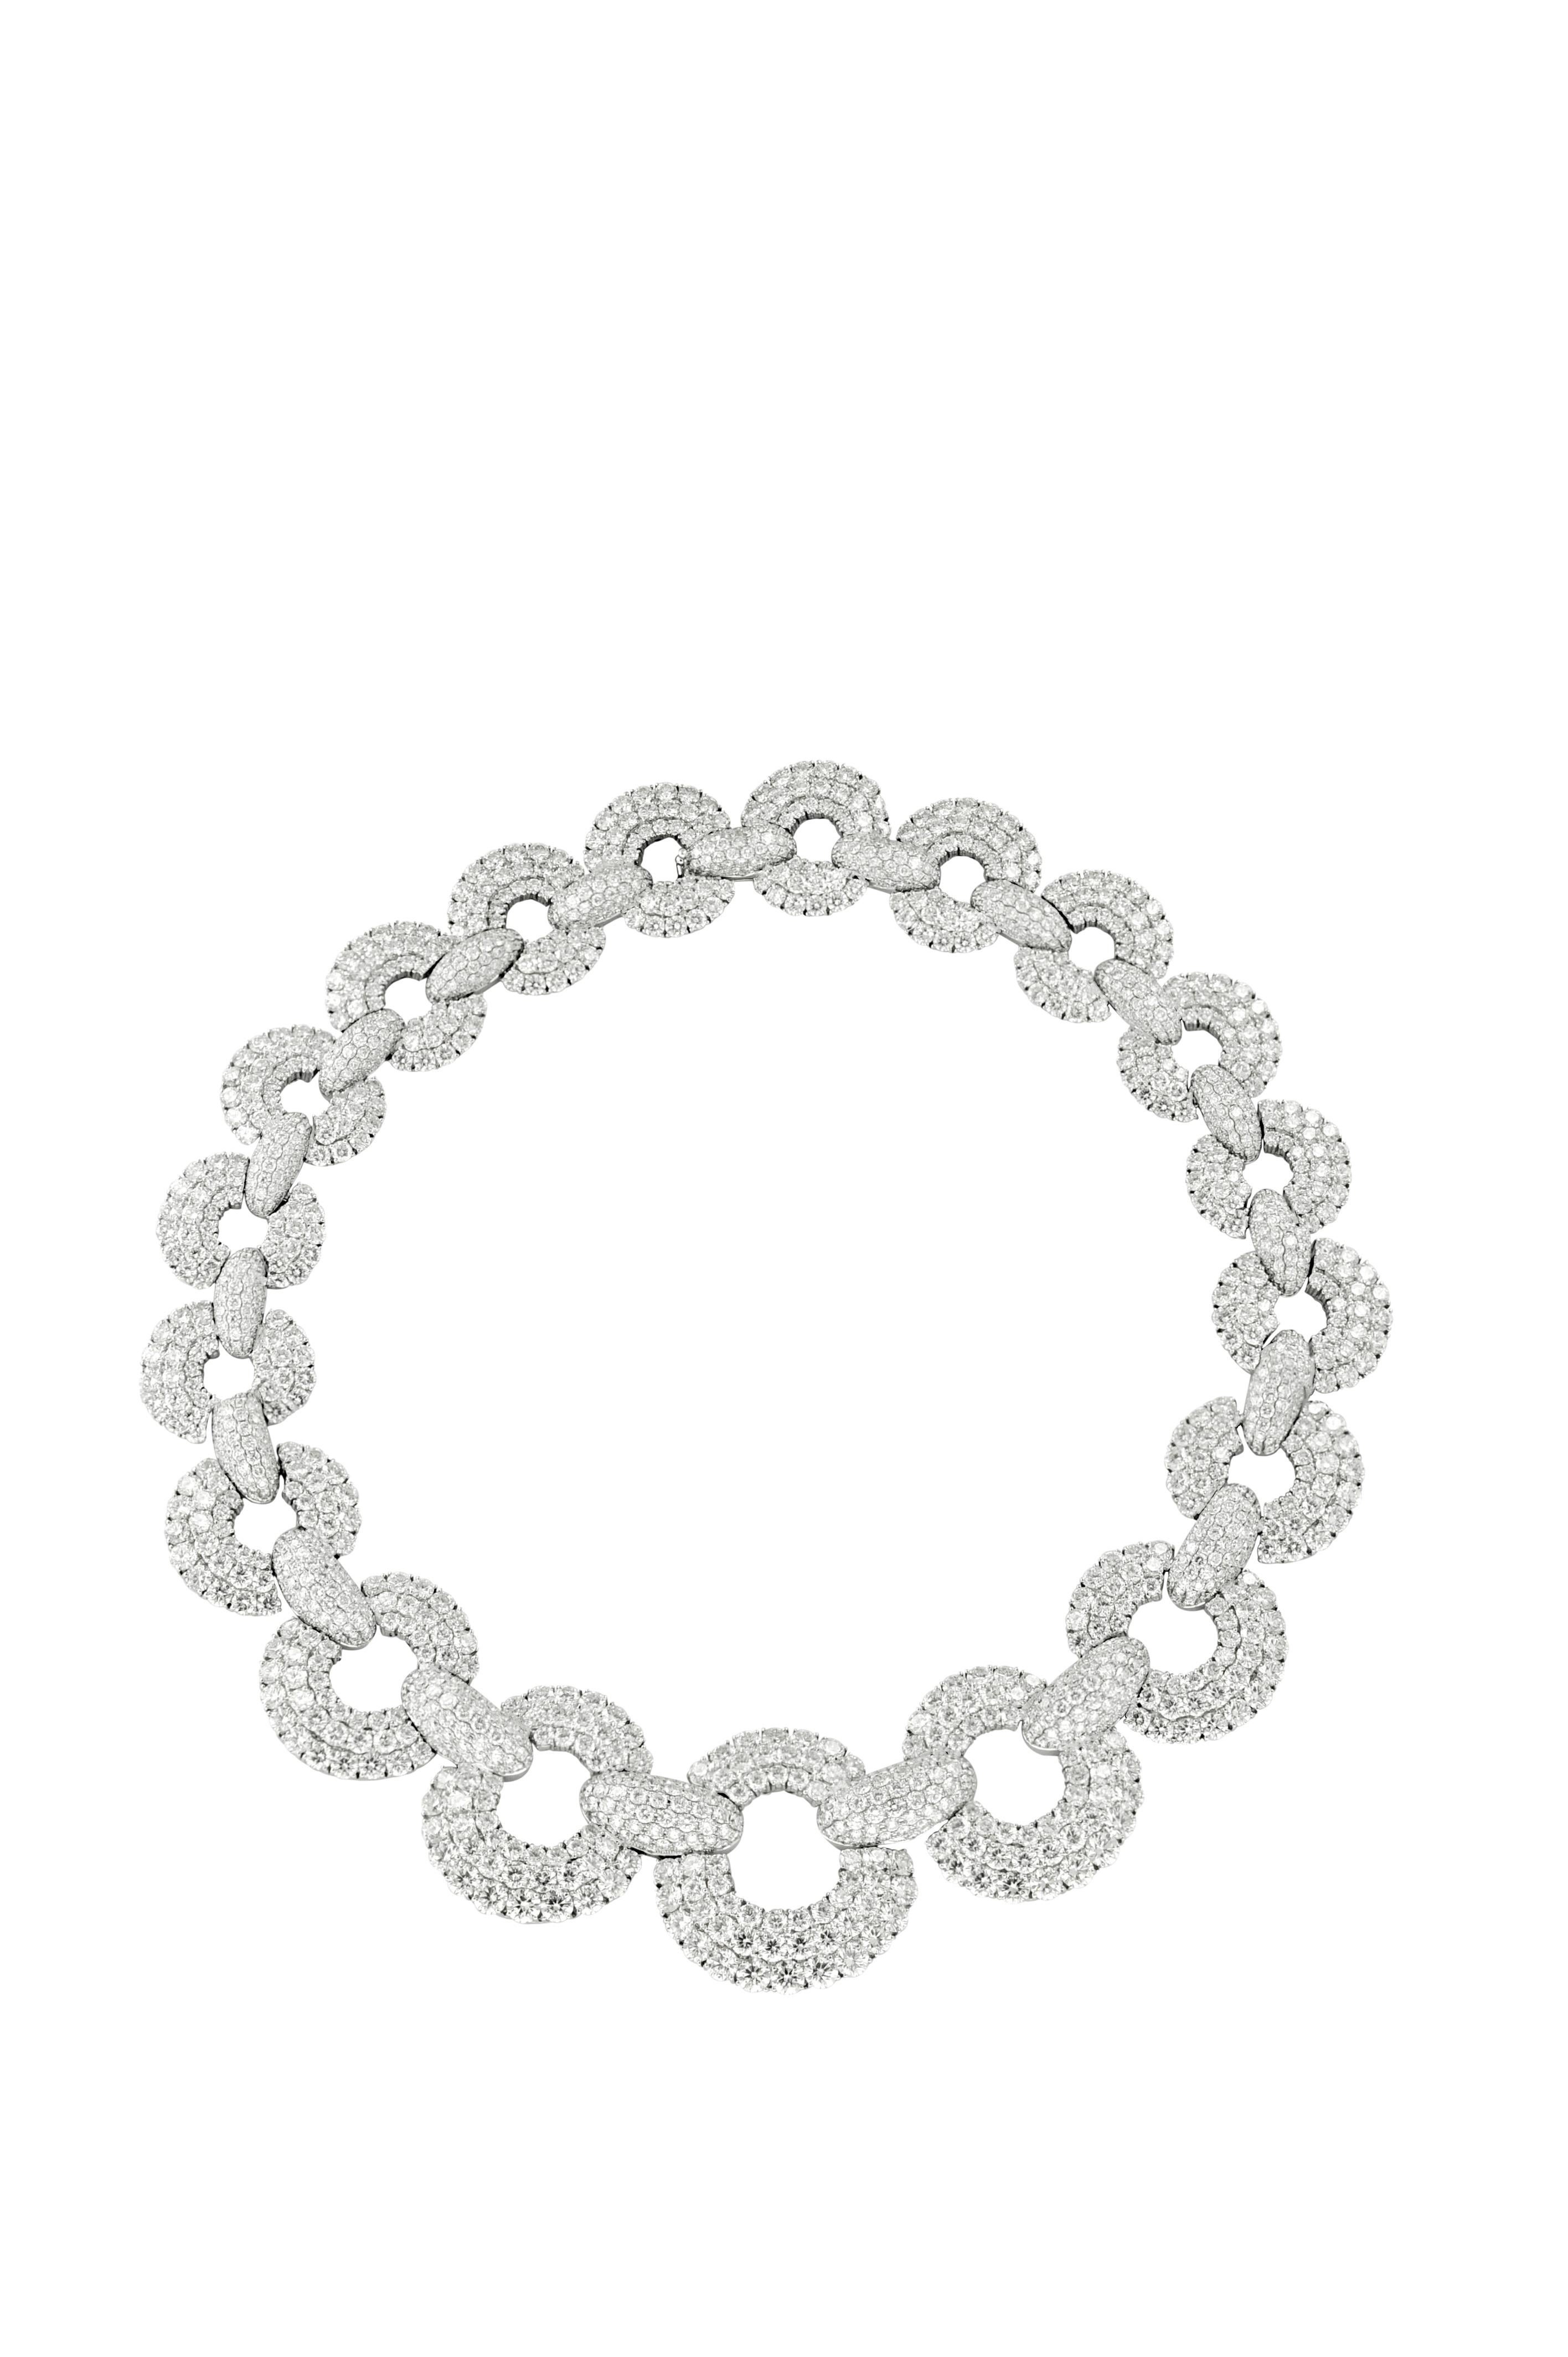 18kt white gold circle pave fashion diamond necklace linked by 19 round all diamond links featuring 107.00ct of round cut diamonds.
